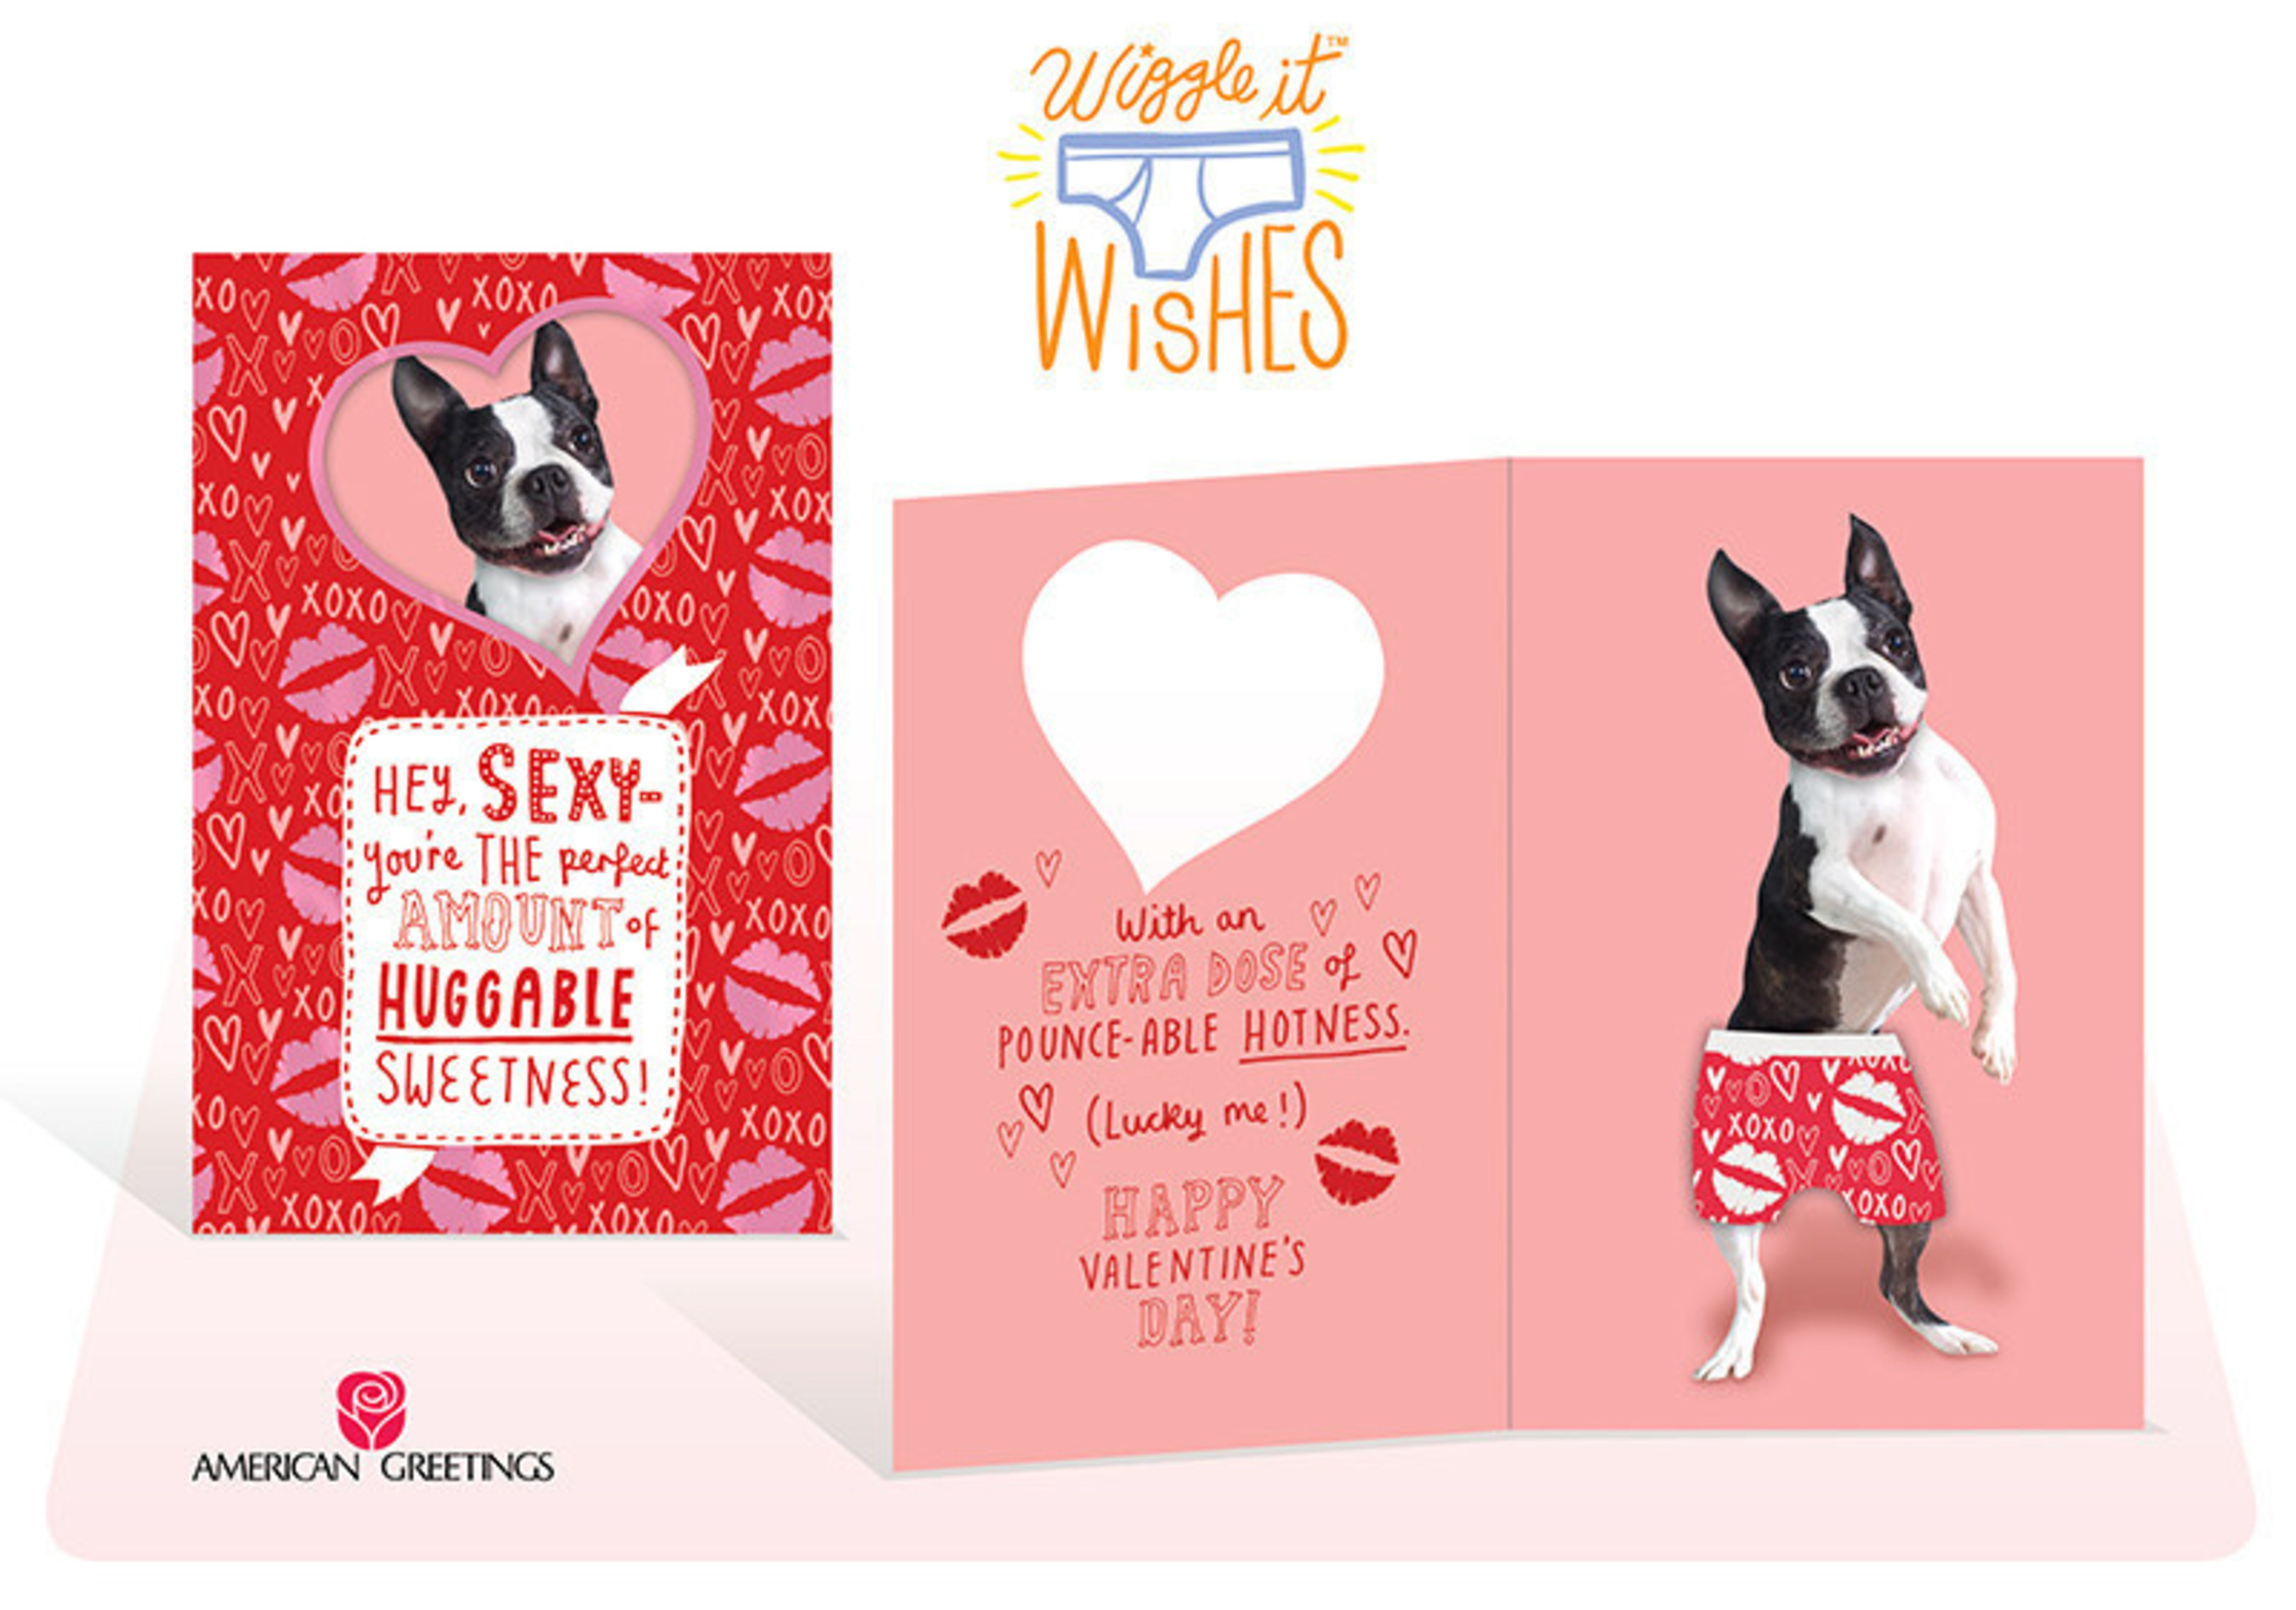 New Wiggle It Wishes(TM) Cards from American Greetings are the Perfect Fit for Valentine's Day